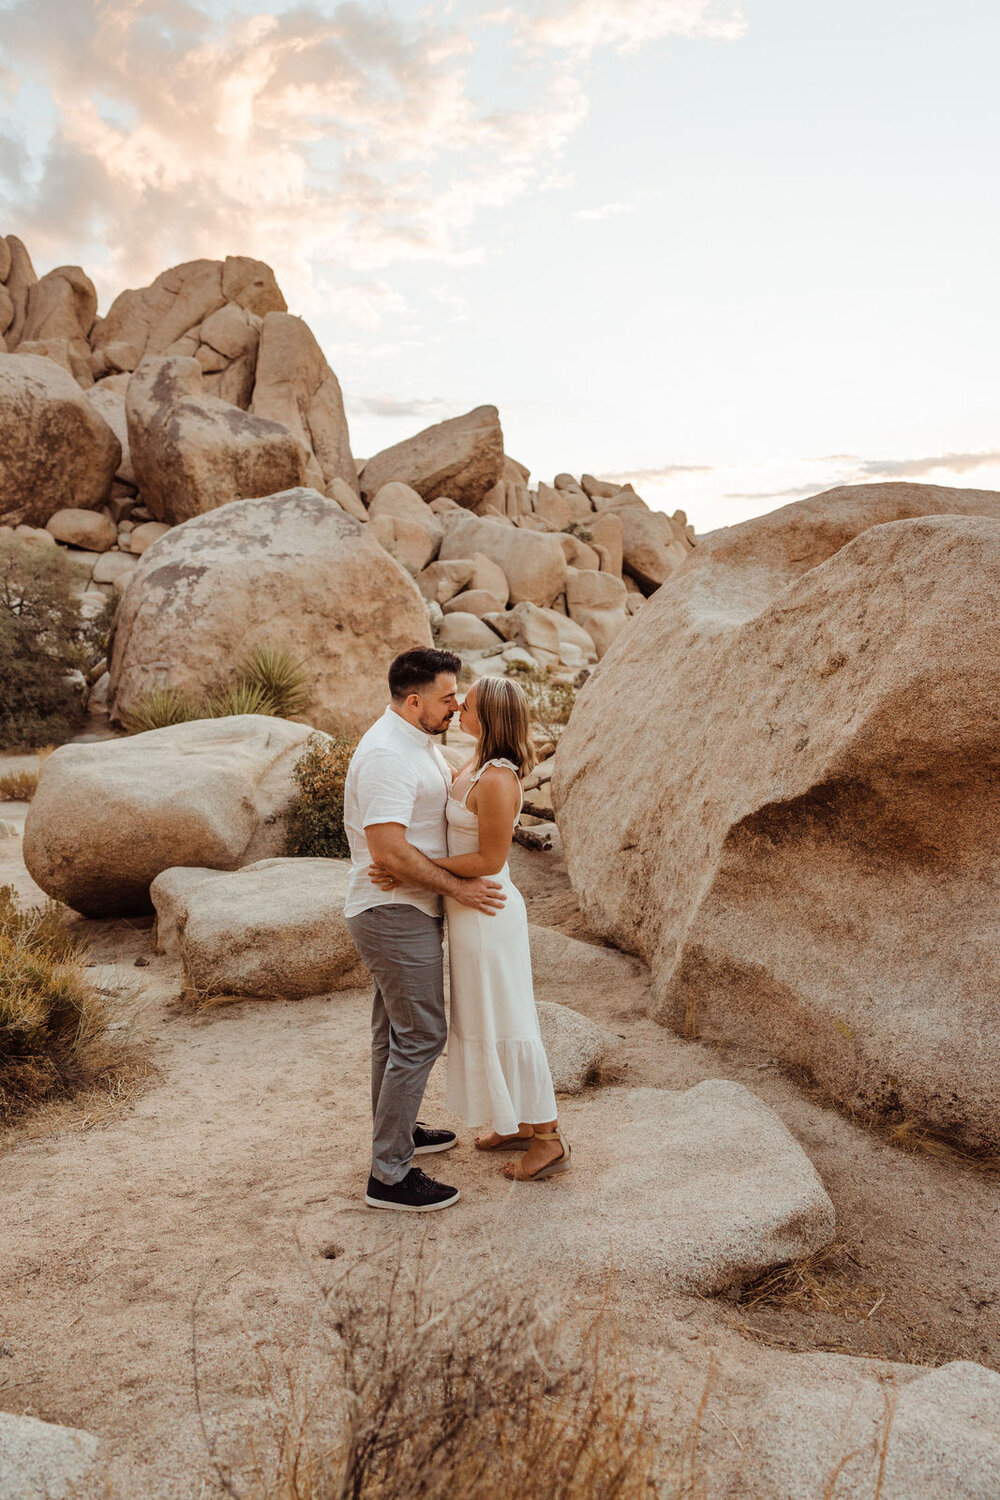 Sunrise Engagement Session in Joshua Tree, California - Couple with Boulders - Photos by Adventurous Elopement + Wedding Photographer Kept Record | www.keptrecord.com